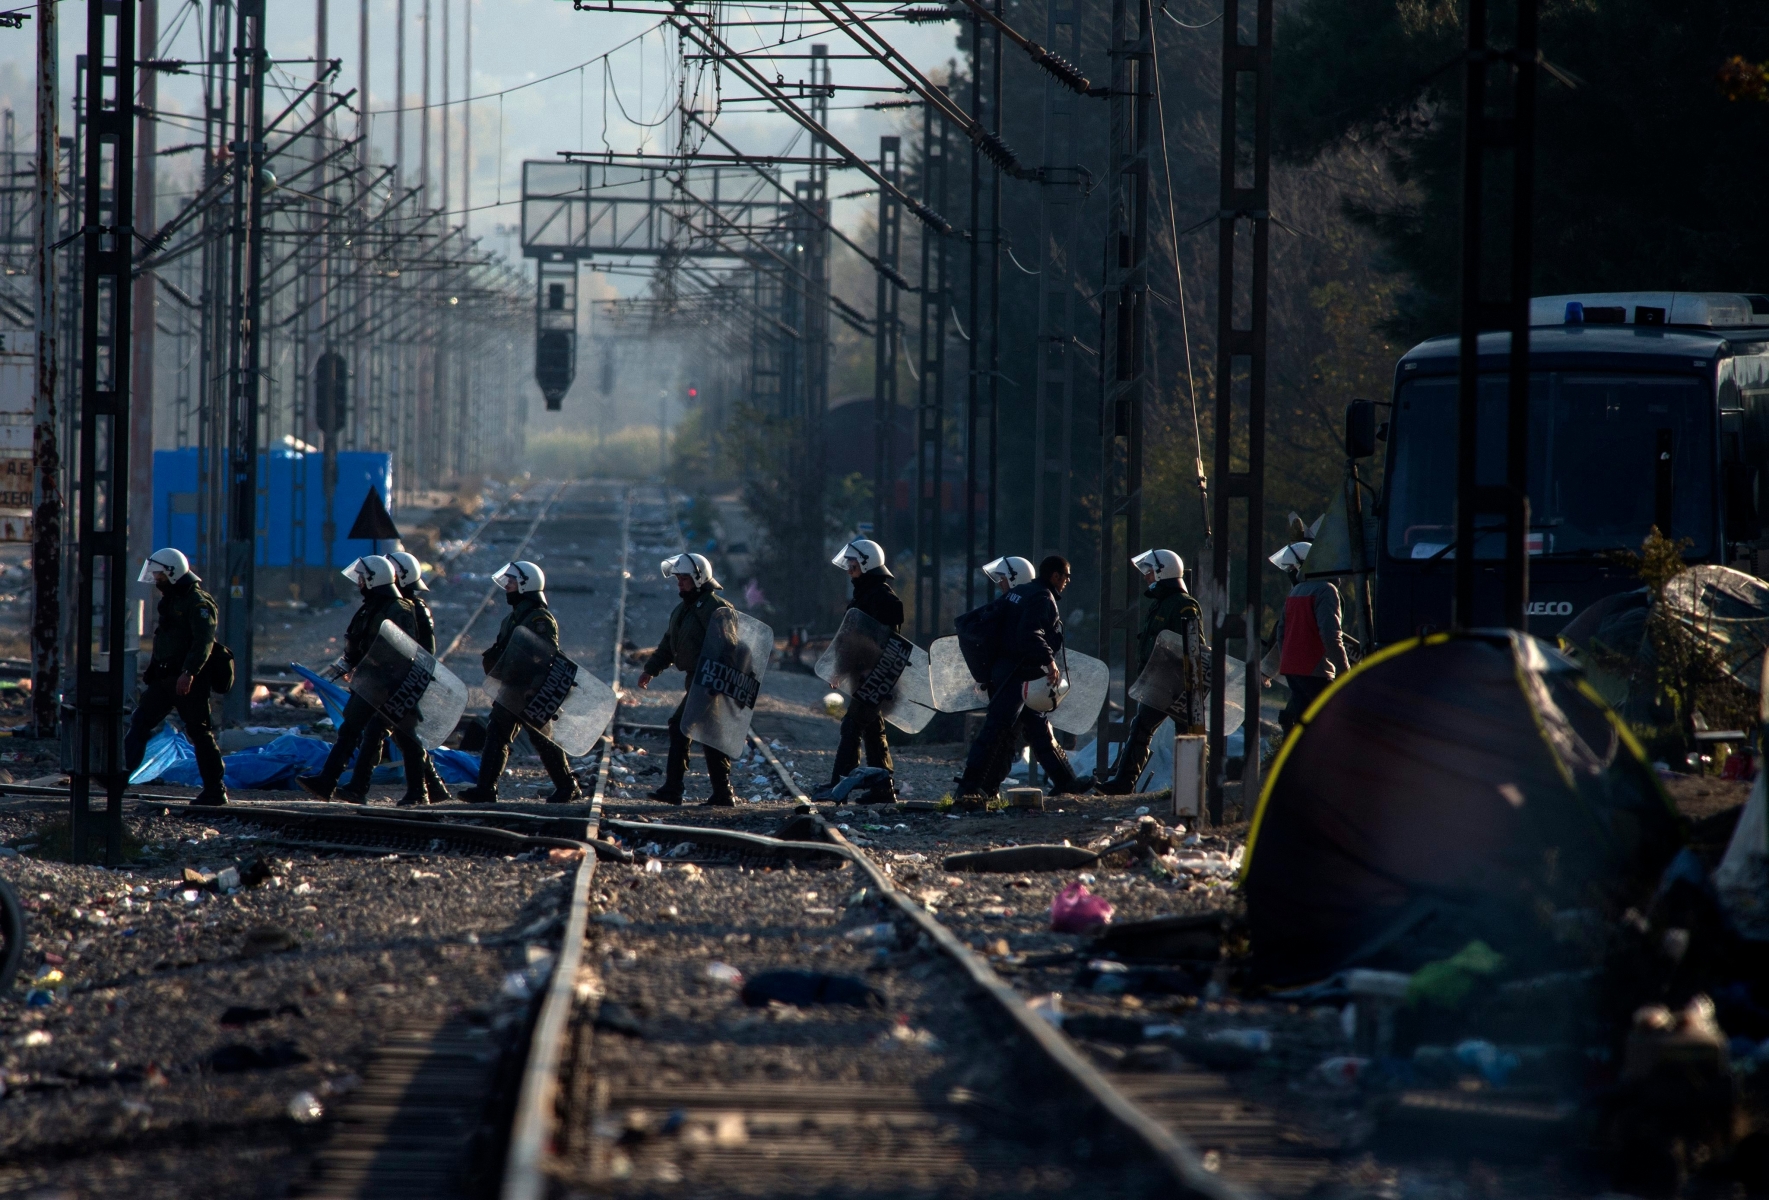 epa05061618 In a photo taken from the Macedonian side of the border, Greek police officers cross the rail tracks along the migrants camp near Idomeni, Greece, 09 December 2015. Greek police began dispersing crowds of people who have been stranded for weeks at Idomeni, a village on the country's border with Macedonia, local media reported. The migrants, mostly from Iran, Bangladesh, Pakistan and Morocco, were placed on buses, some forcibly, and transported to shelters in Athens 550 kilometres to the south, reports said. Around 1,200 people had been stranded at the border since Macedonia started denying entry to so-called economic migrants trying to reach Western Europe via the Balkan route, which stretches from Turkey, through Greece, Macedonia, Serbia, Croatia, Slovenia and finally to Austria. In Athens, they will have to apply for asylum or be repatriated. Greek police sealed off Idomeni on 09 December morning, also blocking access to reporters and humanitarian workers.  EPA/GEORGI LI